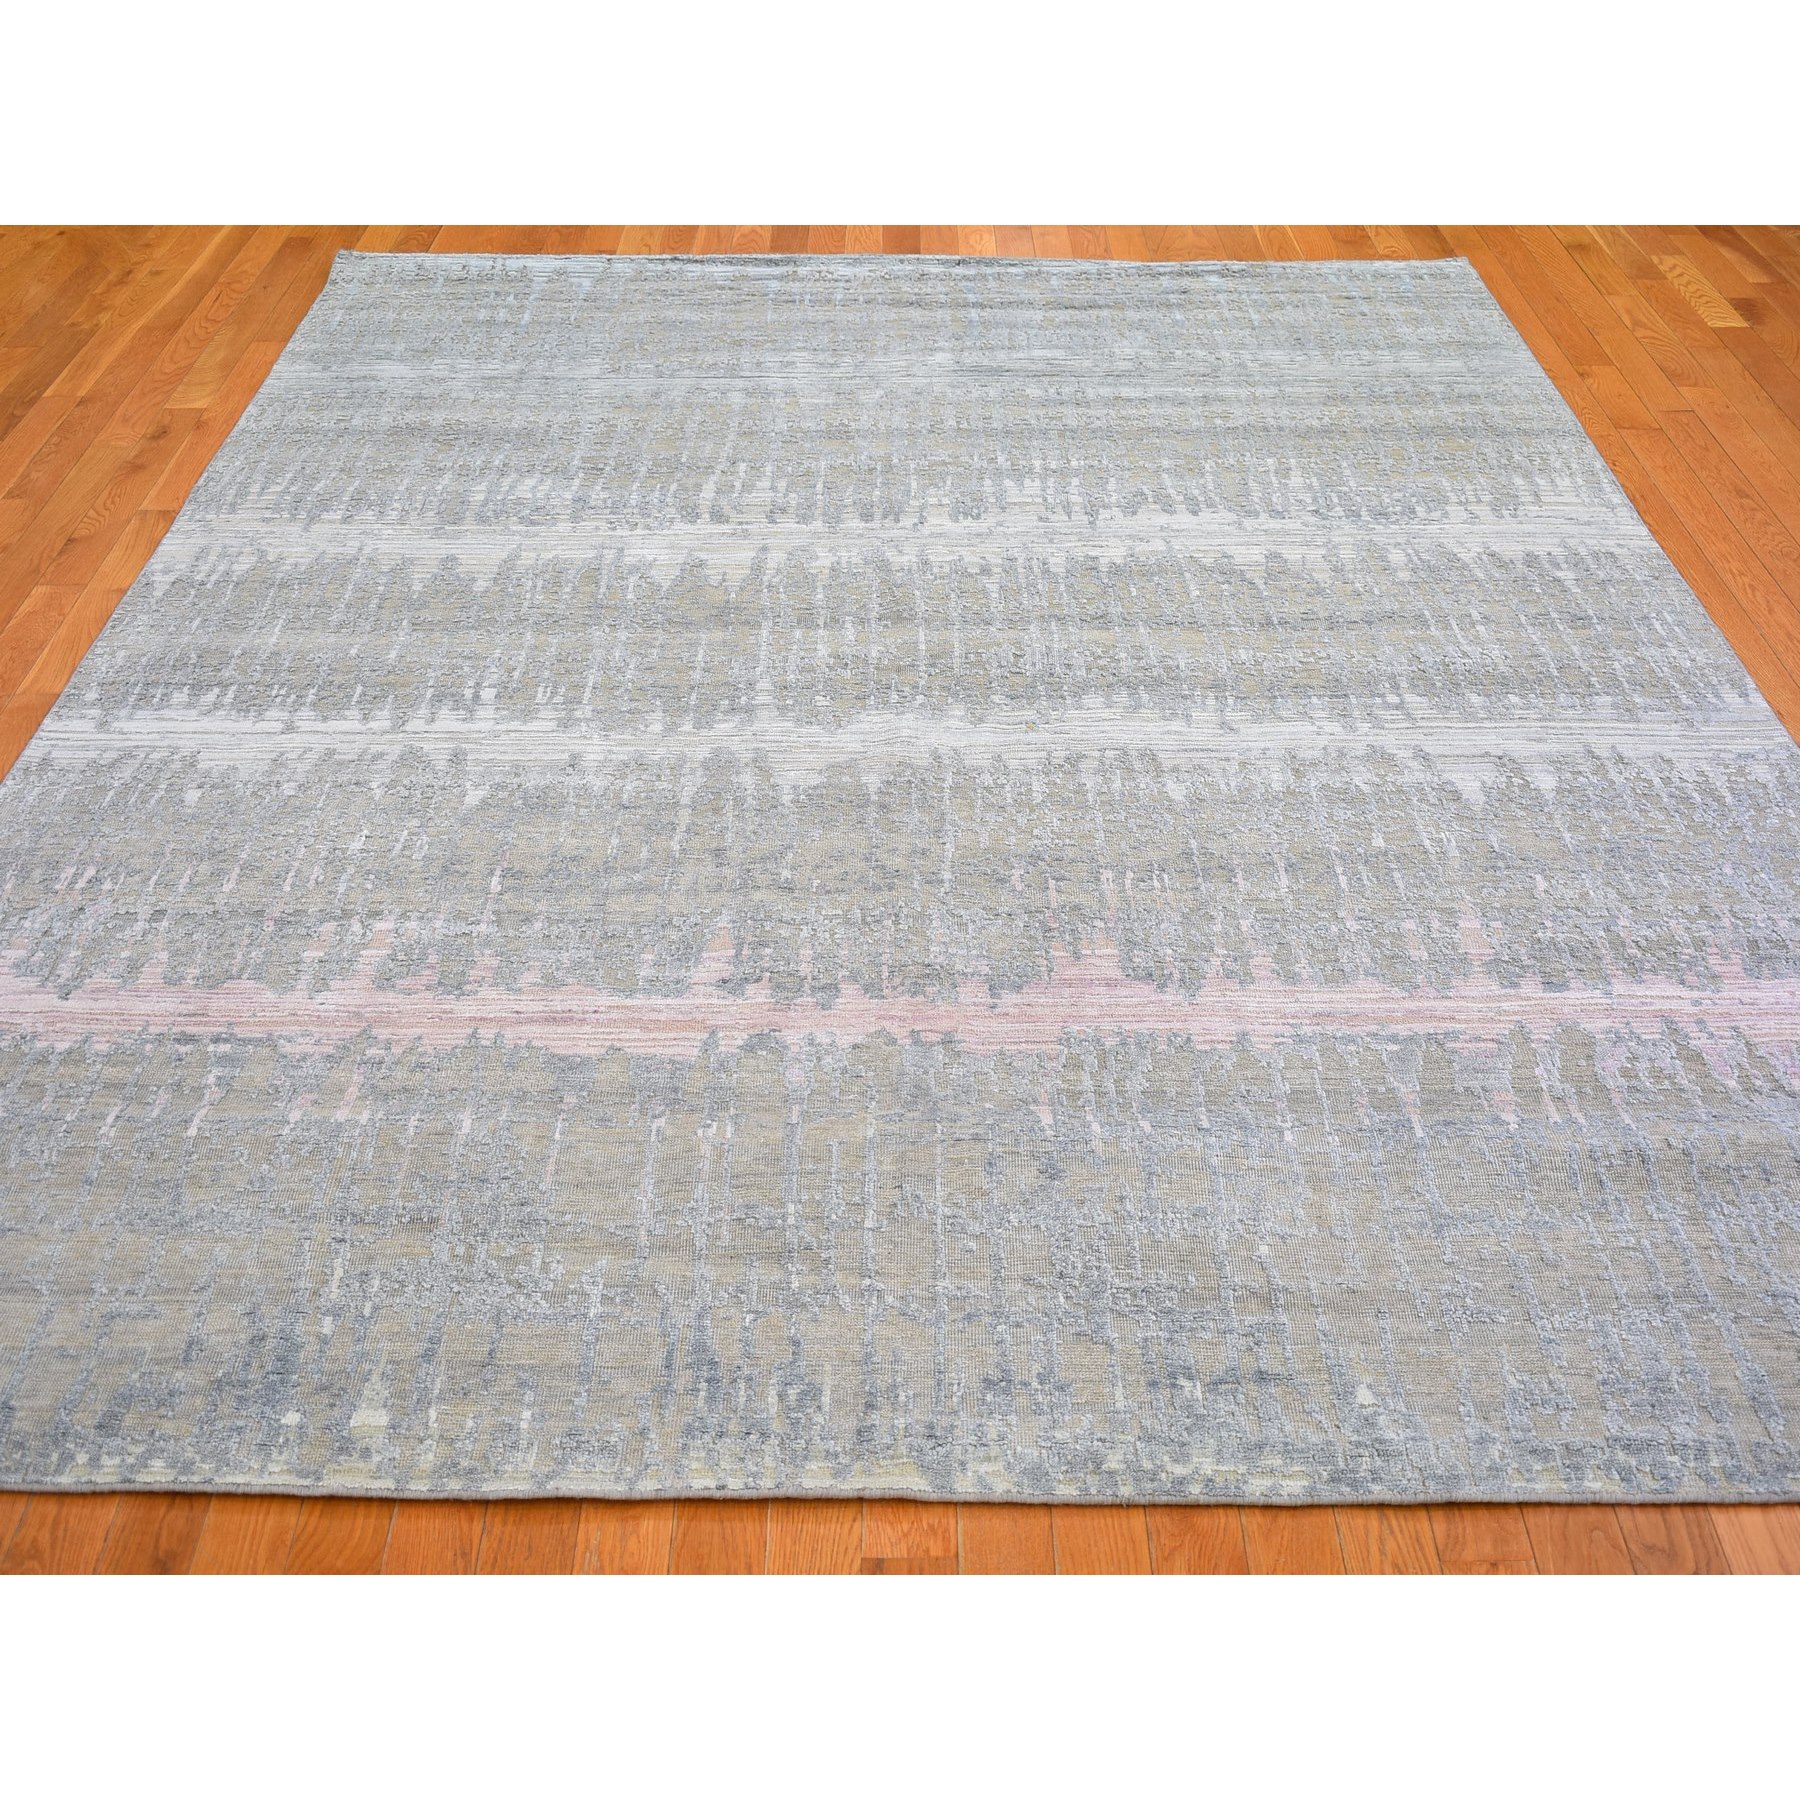 8'x10'3" Hand Woven Cardiac Design with Pastel Colors Textured Wool and Pure Silk Oriental Rug 